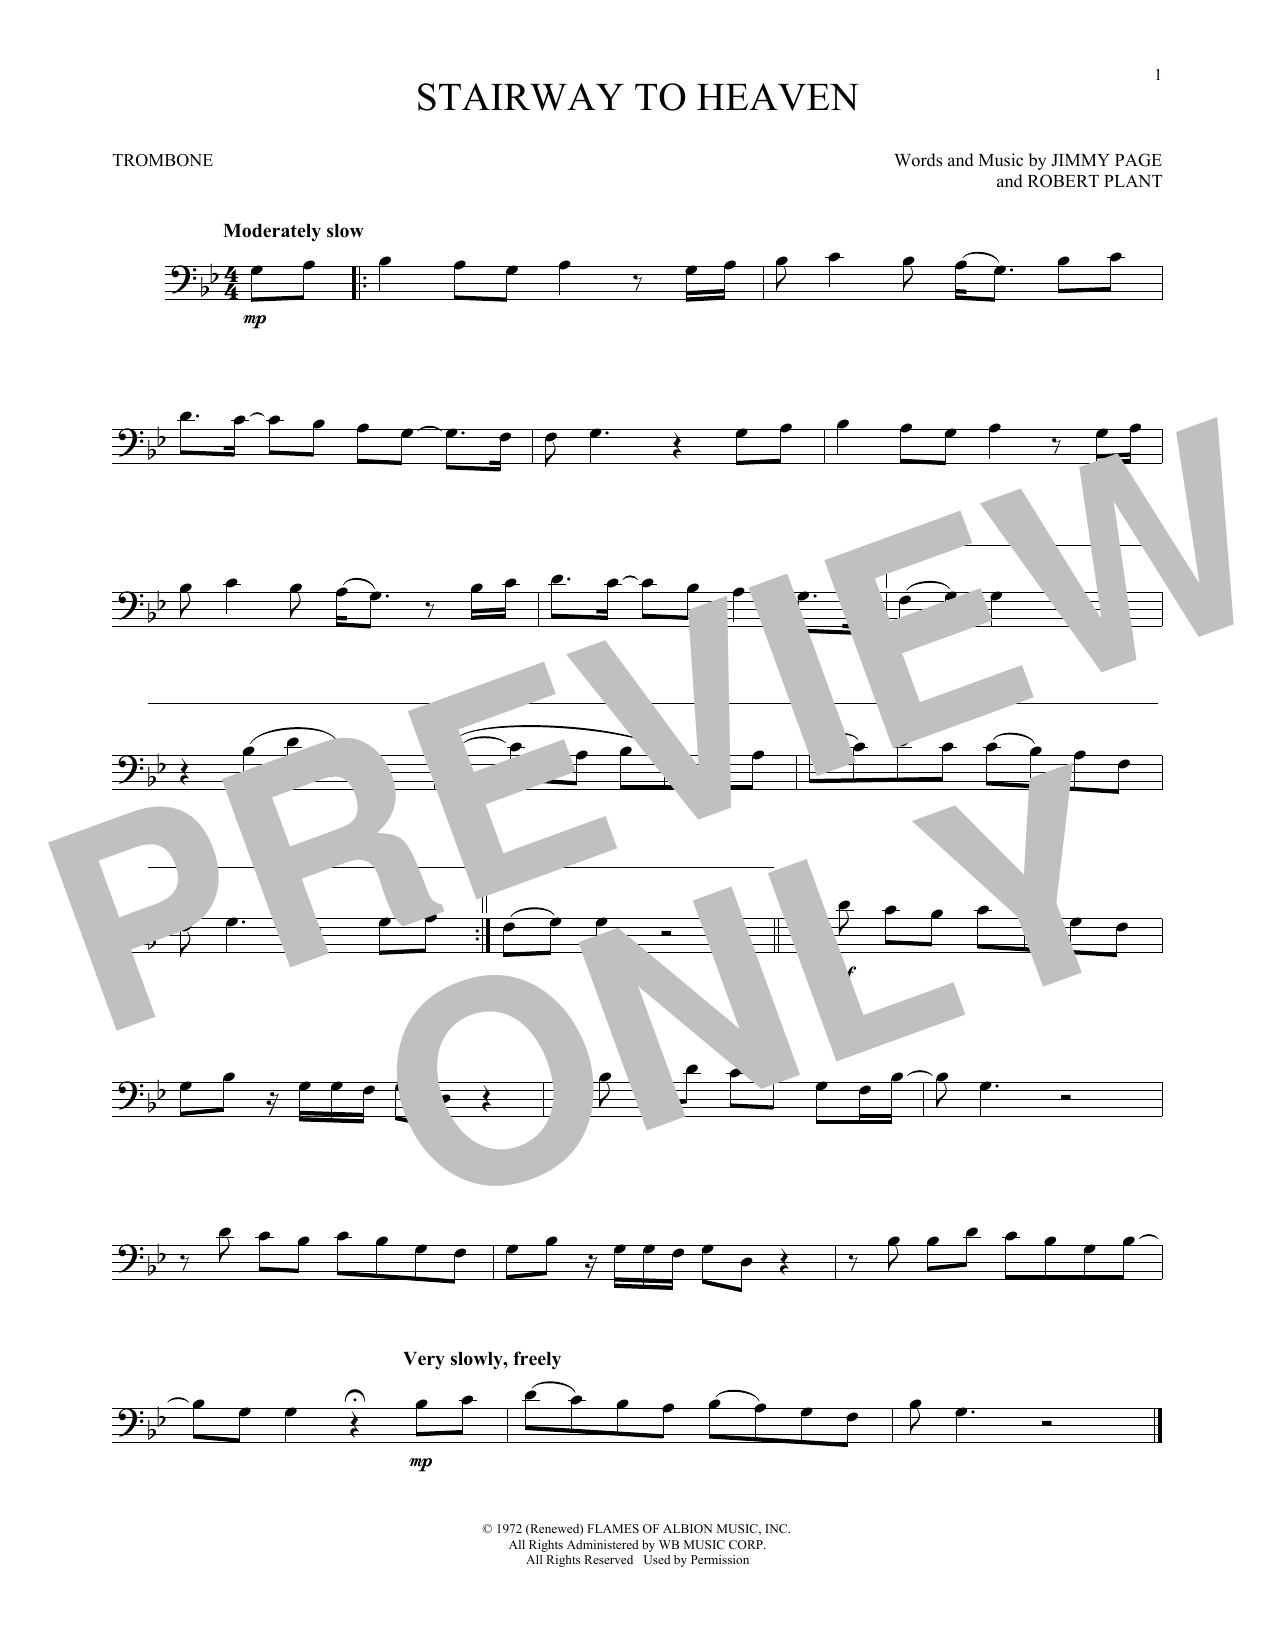 Download Led Zeppelin Stairway To Heaven Sheet Music